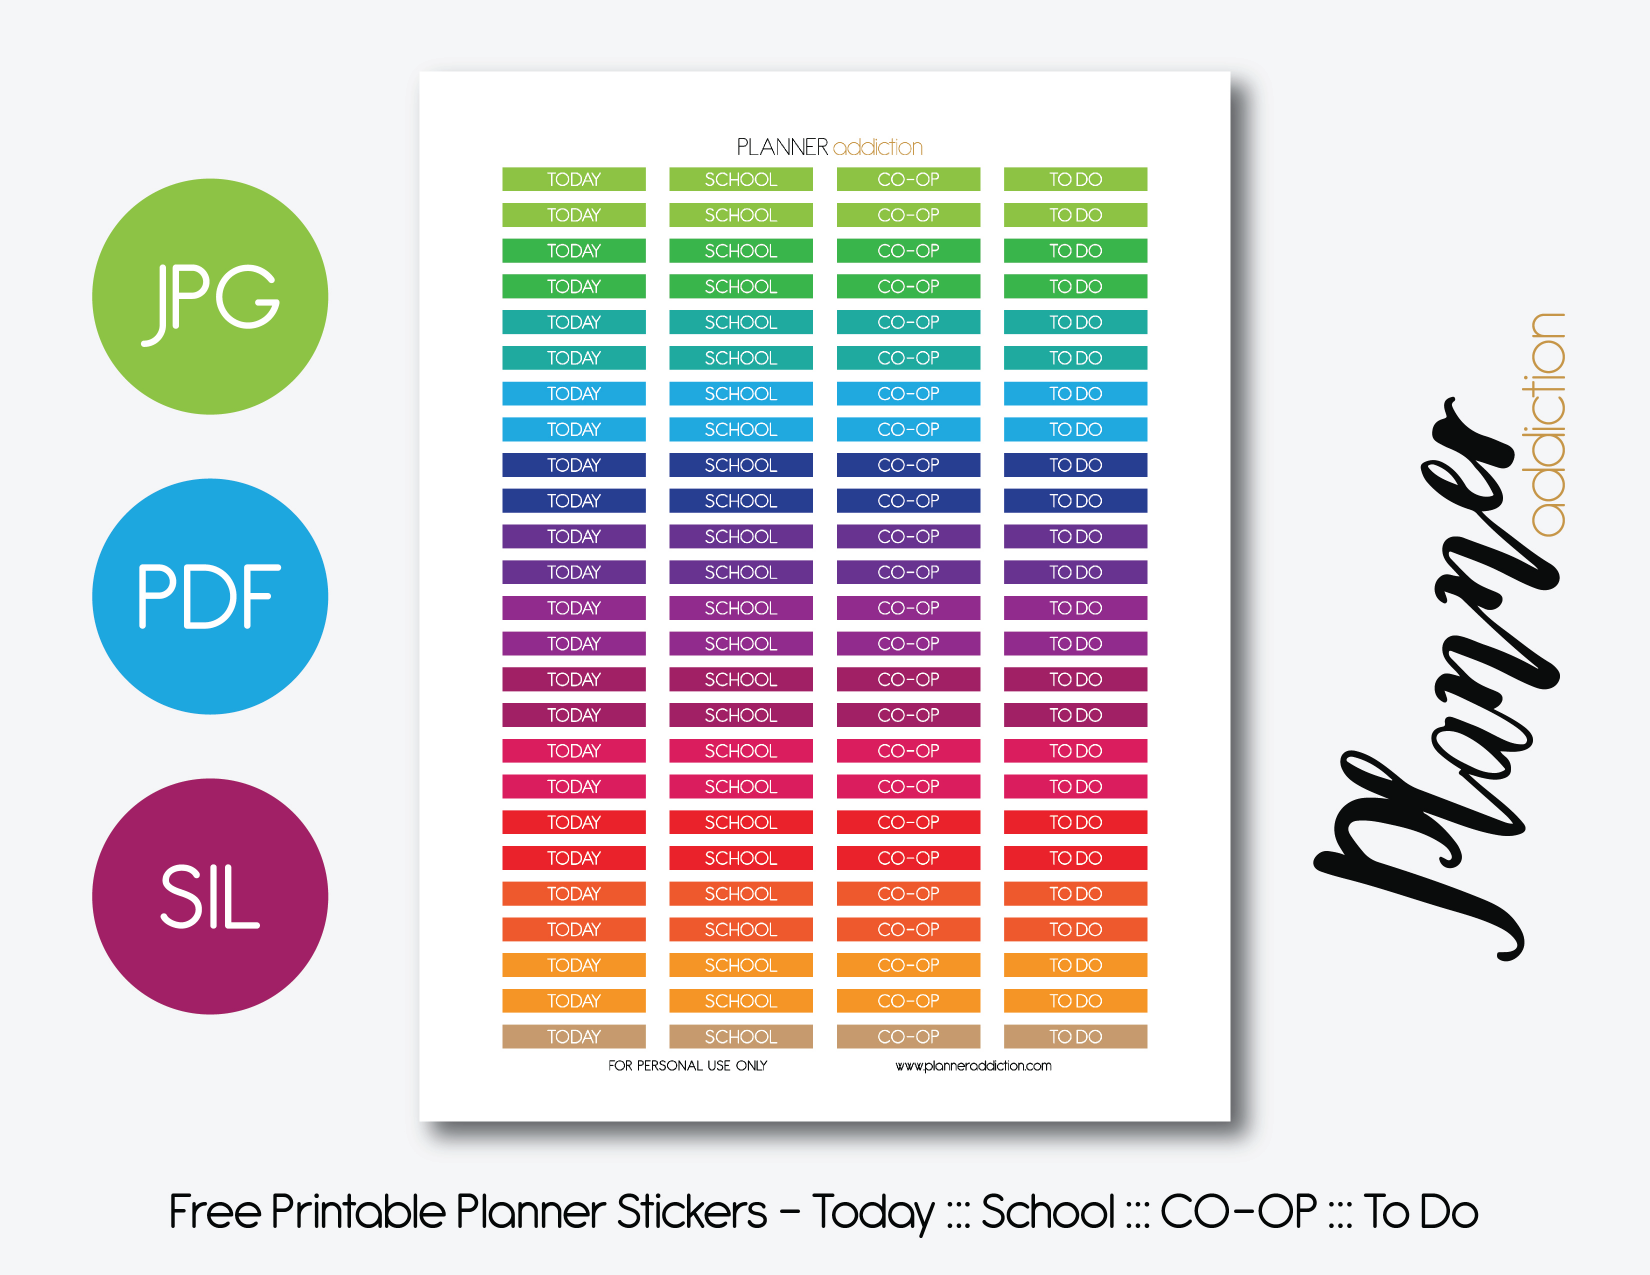 Free printable planner stickers – Planner Addiction